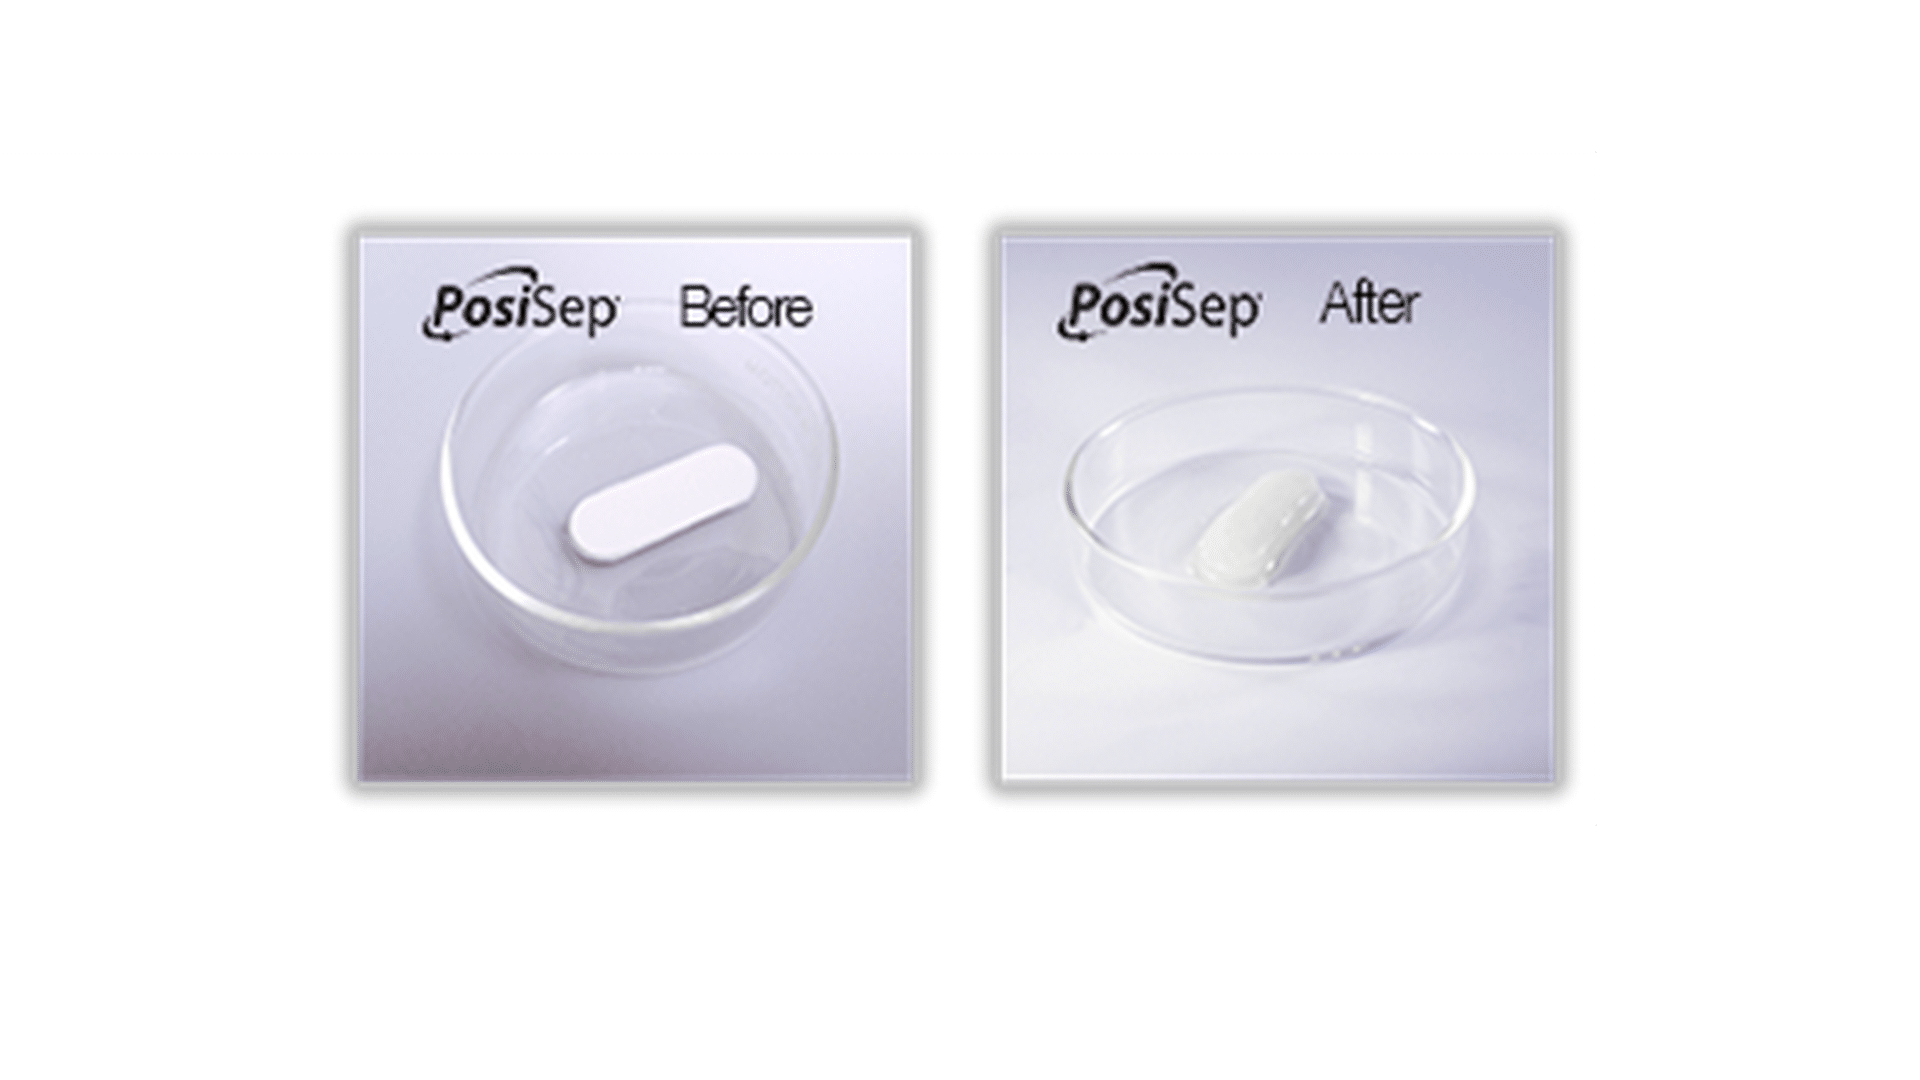 PosiSep® Comes as a firm sponge and turns into a gel after placement in the sinus cavity and hydration with saline or moisture in the sinus.